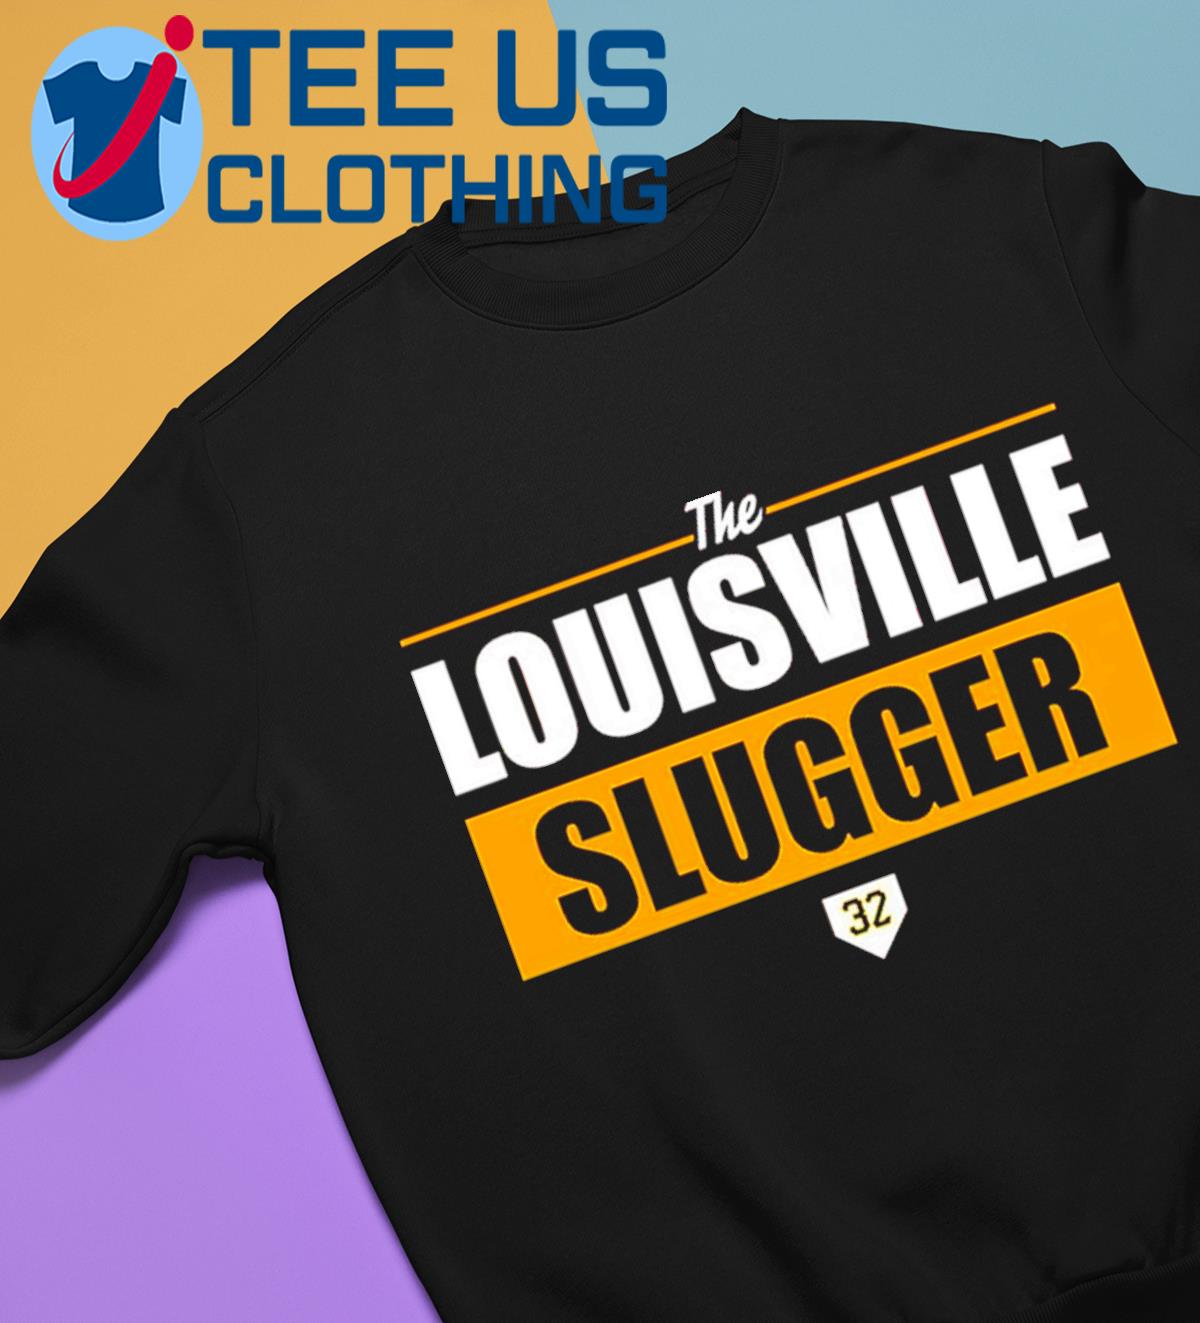 Pghclothing the louisville slugger shirt, hoodie, sweater, long sleeve and  tank top